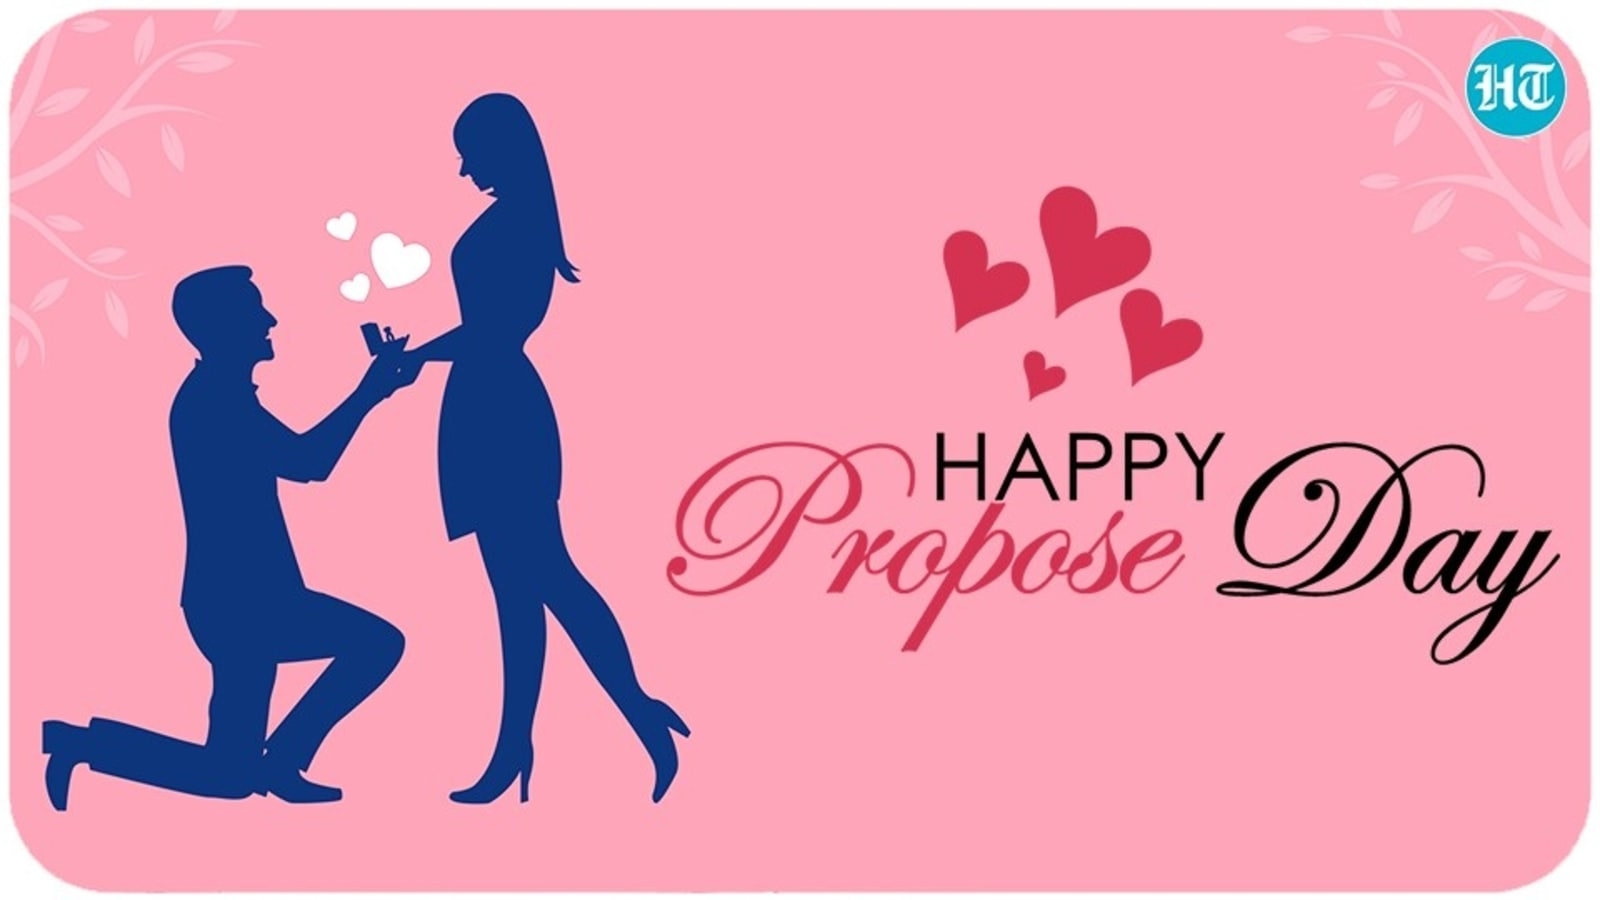 Happy Propose Day Best wishes, images, messages to send your special